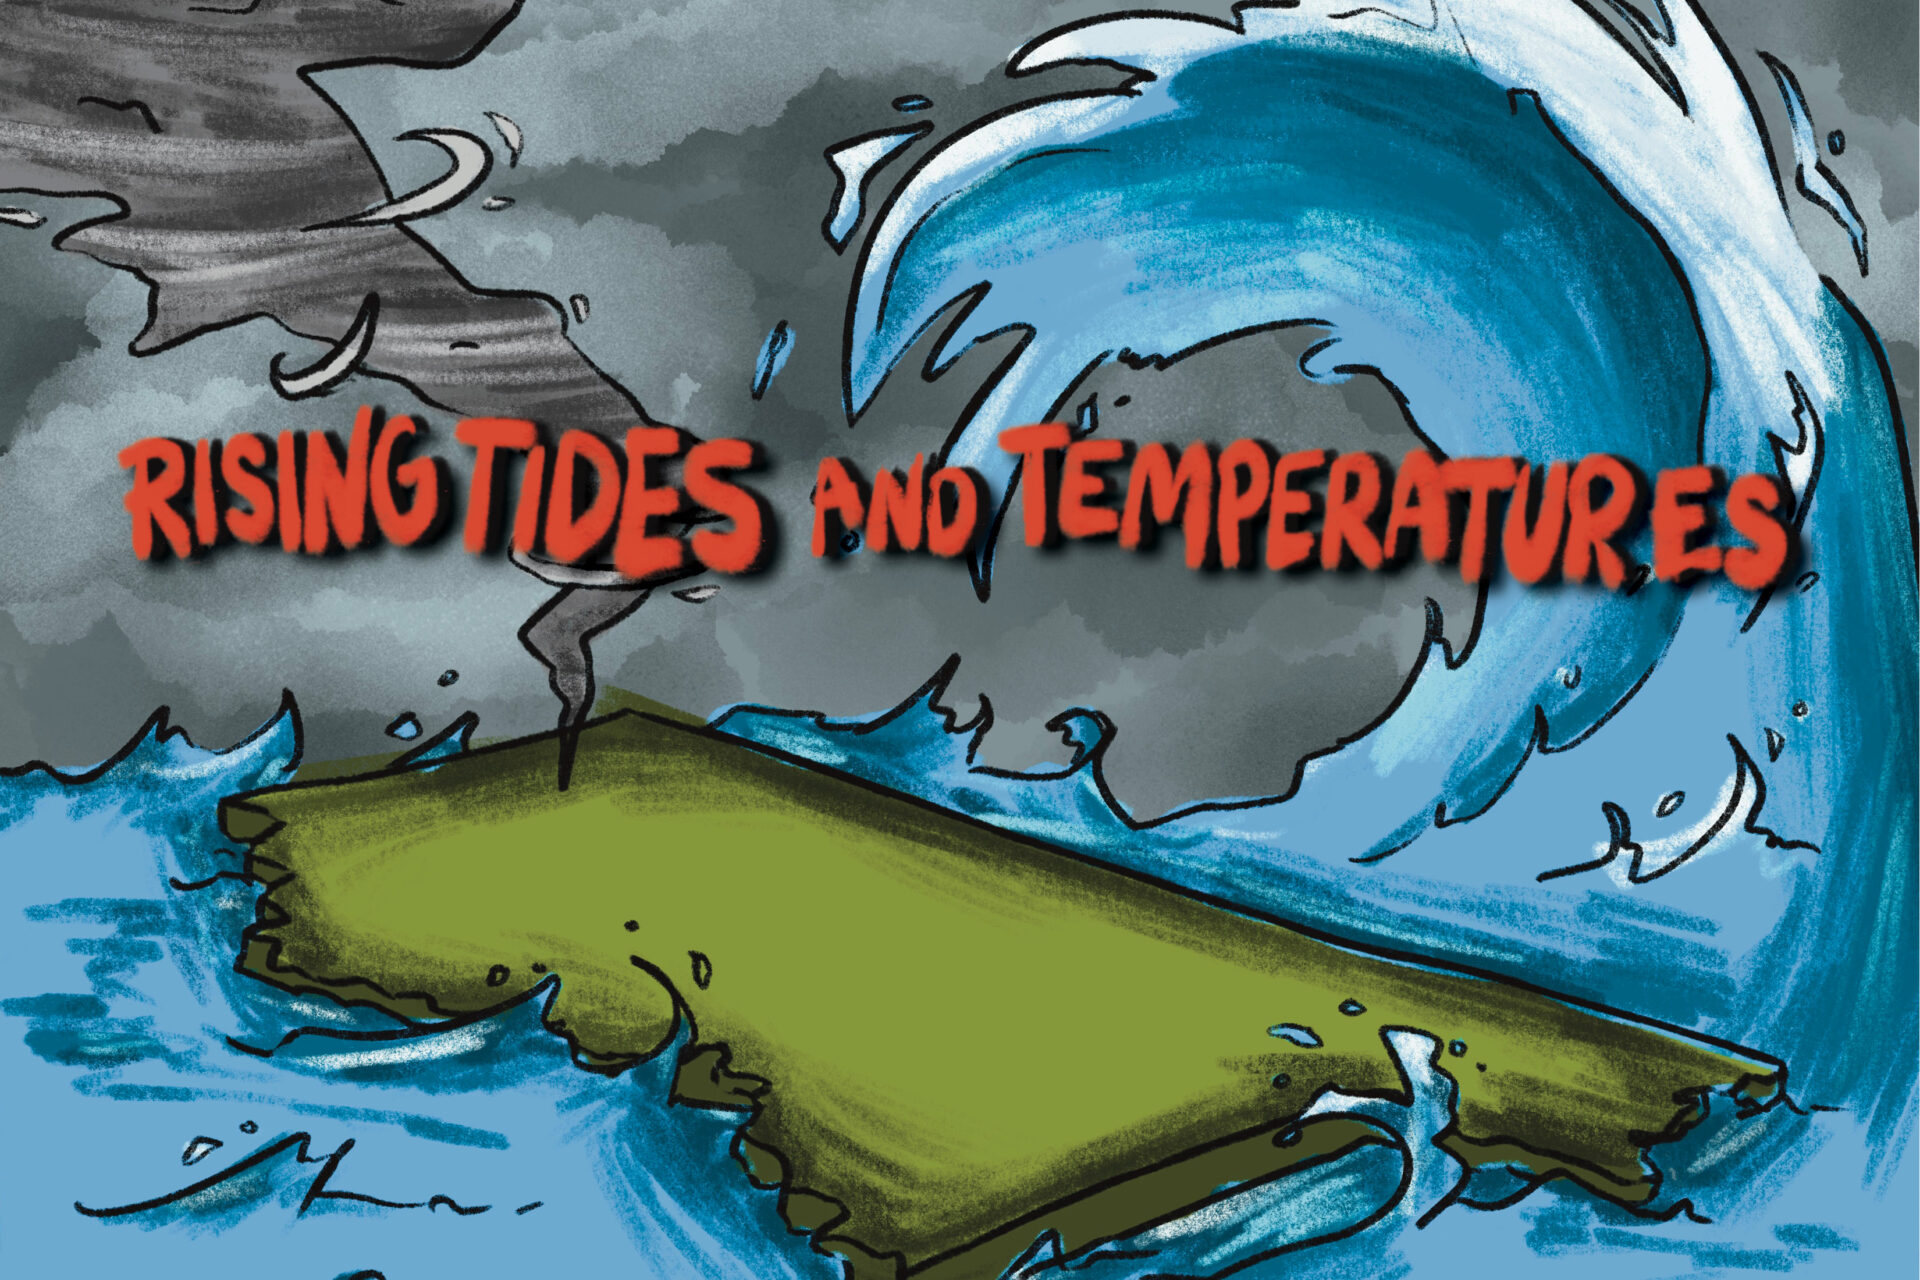 Rising Tides, Rising Temperatures' Student Series Will Tell the